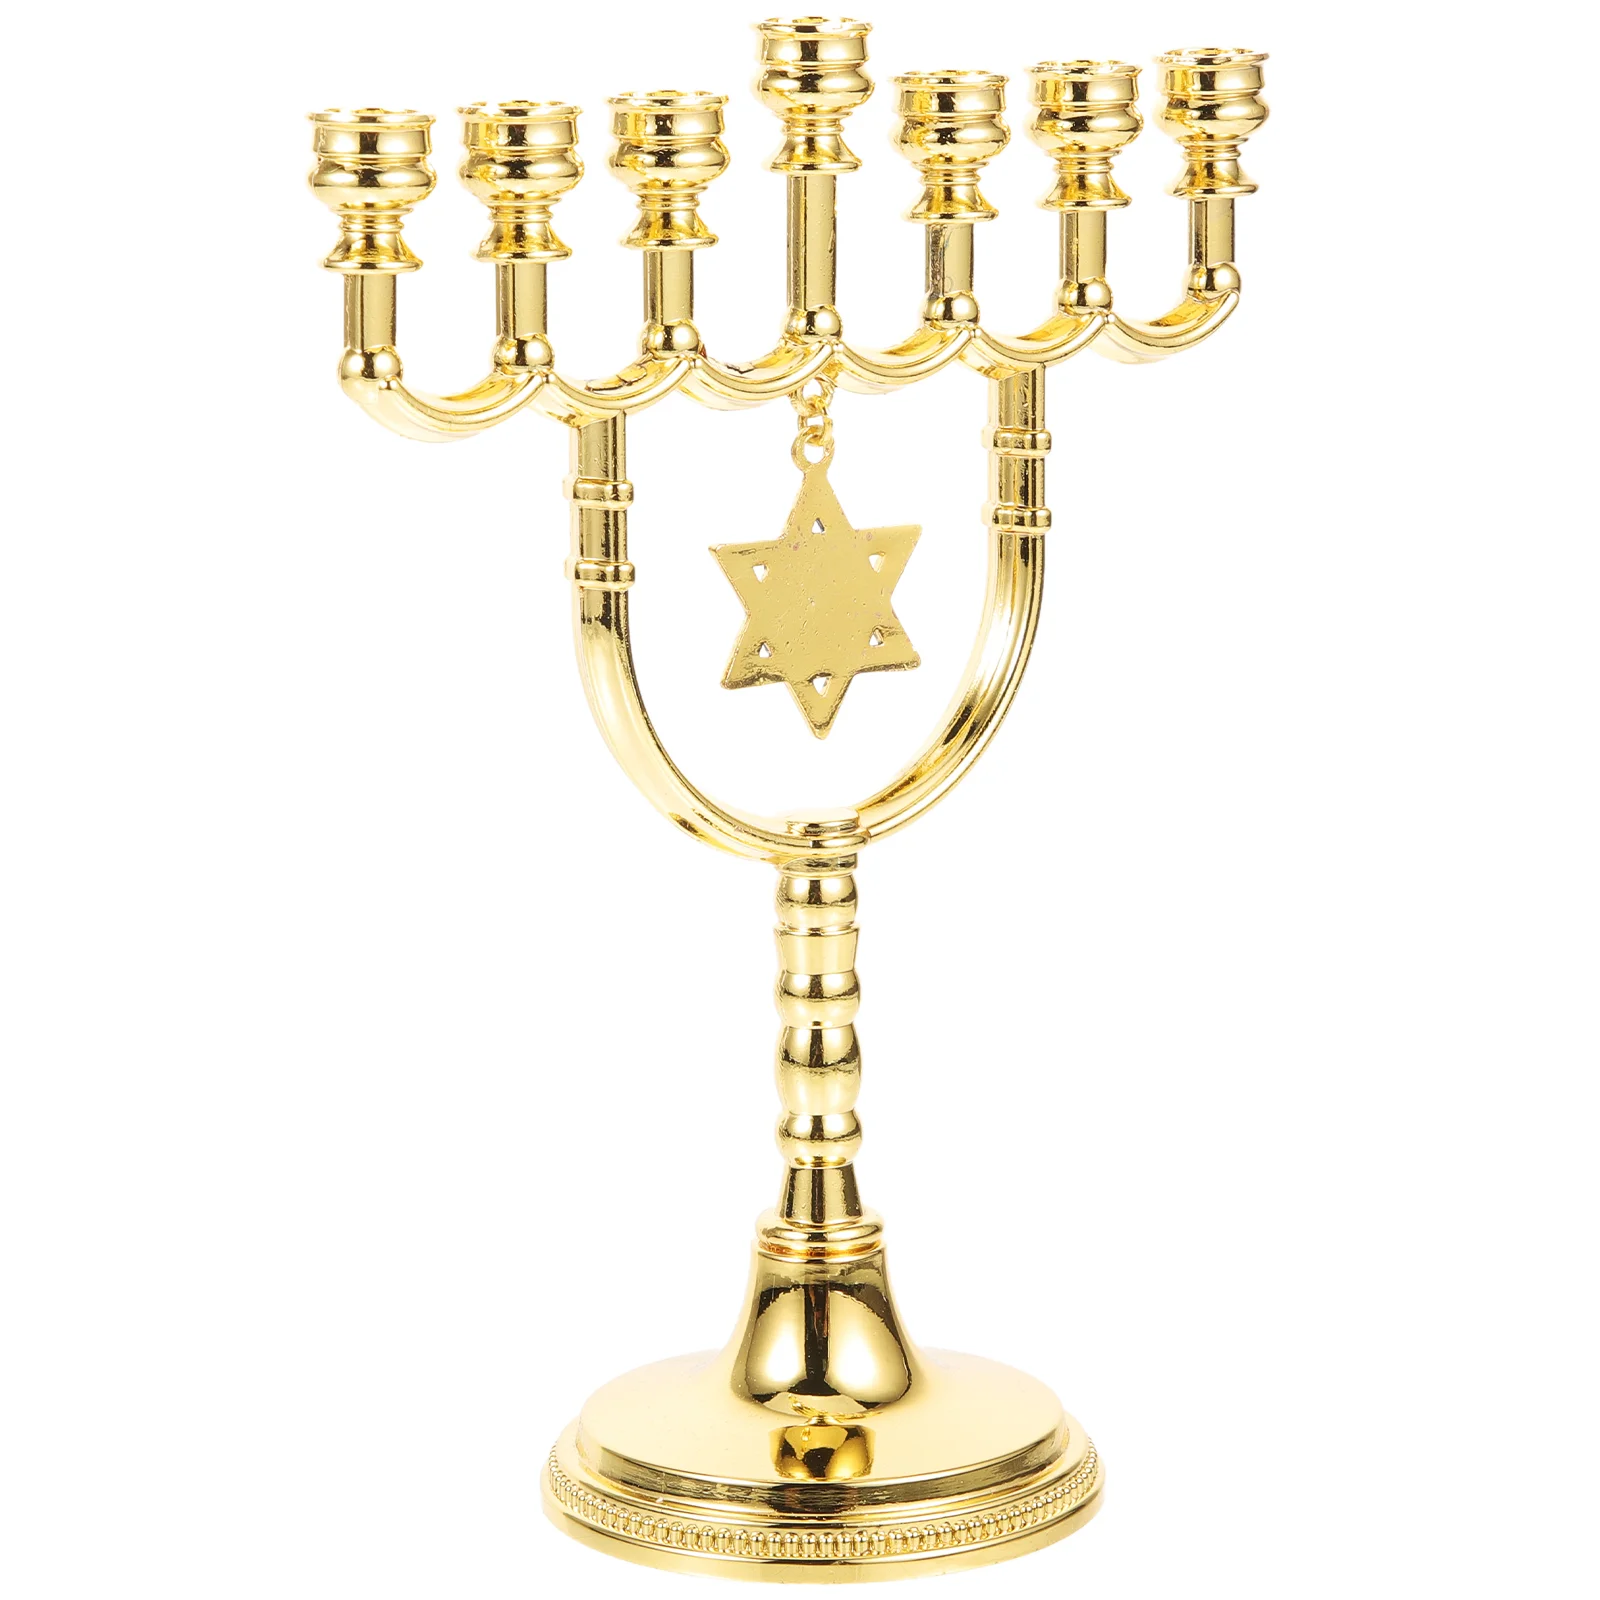 

Seven Headed Candlestick Display Dinner Table Decor Decorate Jewish Holder Holders Taper Candlesticks Metal Fireplace